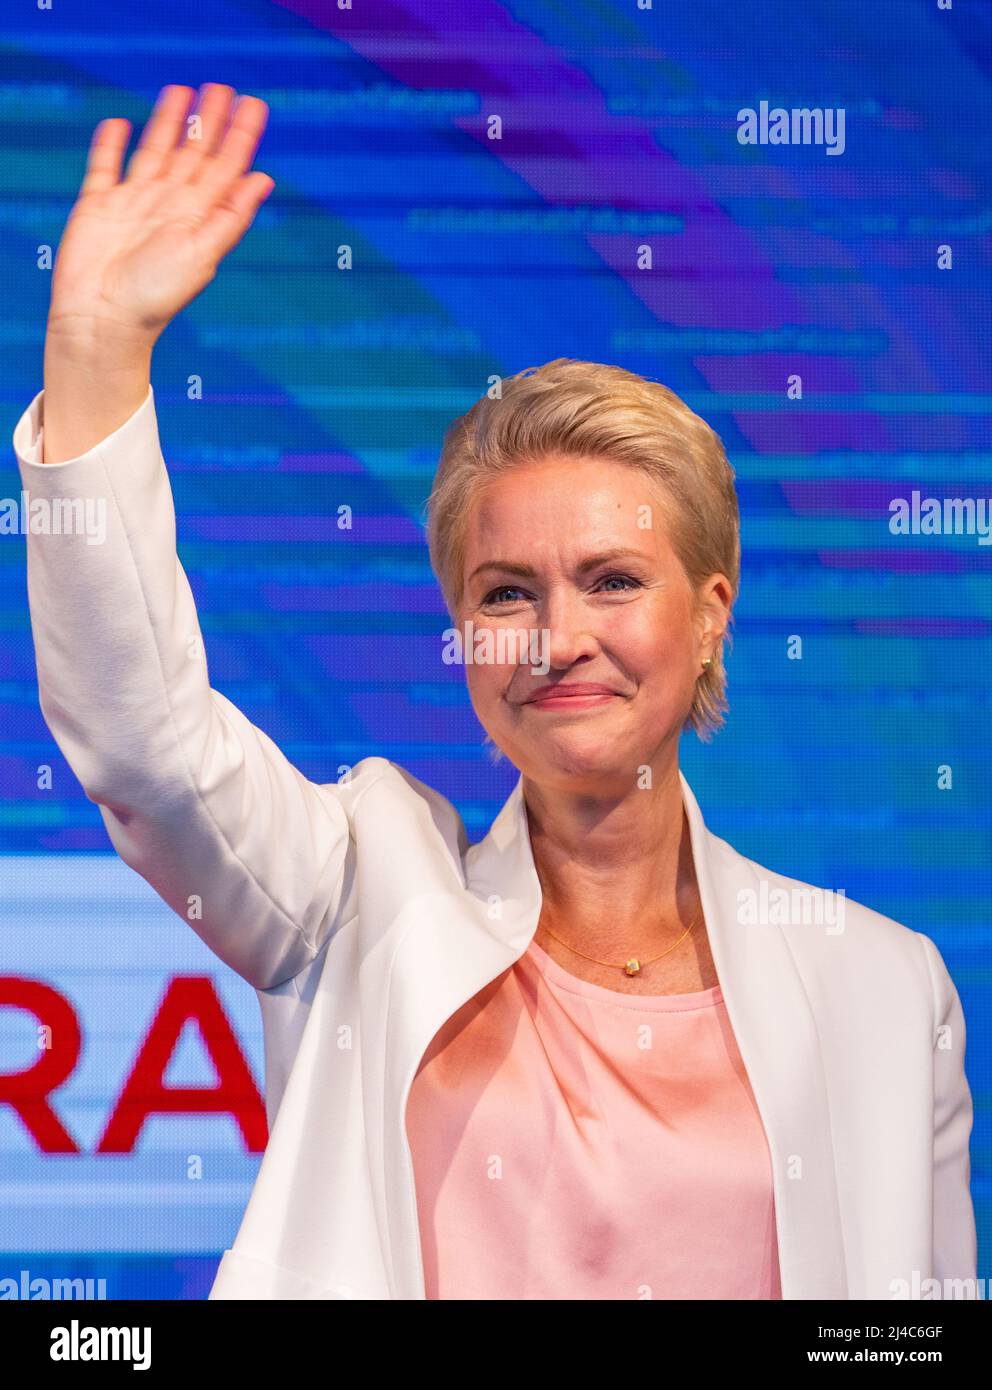 Schwerin, Germany. 26th Sep, 2021. Manuela Schwesig (SPD), Minister President of Mecklenburg-Western Pomerania and the SPD's top candidate for the state elections in Mecklenburg-Western Pomerania, celebrates at the SPD's election party at Brinkamas. Credit: Jens Büttner/dpa/Alamy Live News Stock Photo